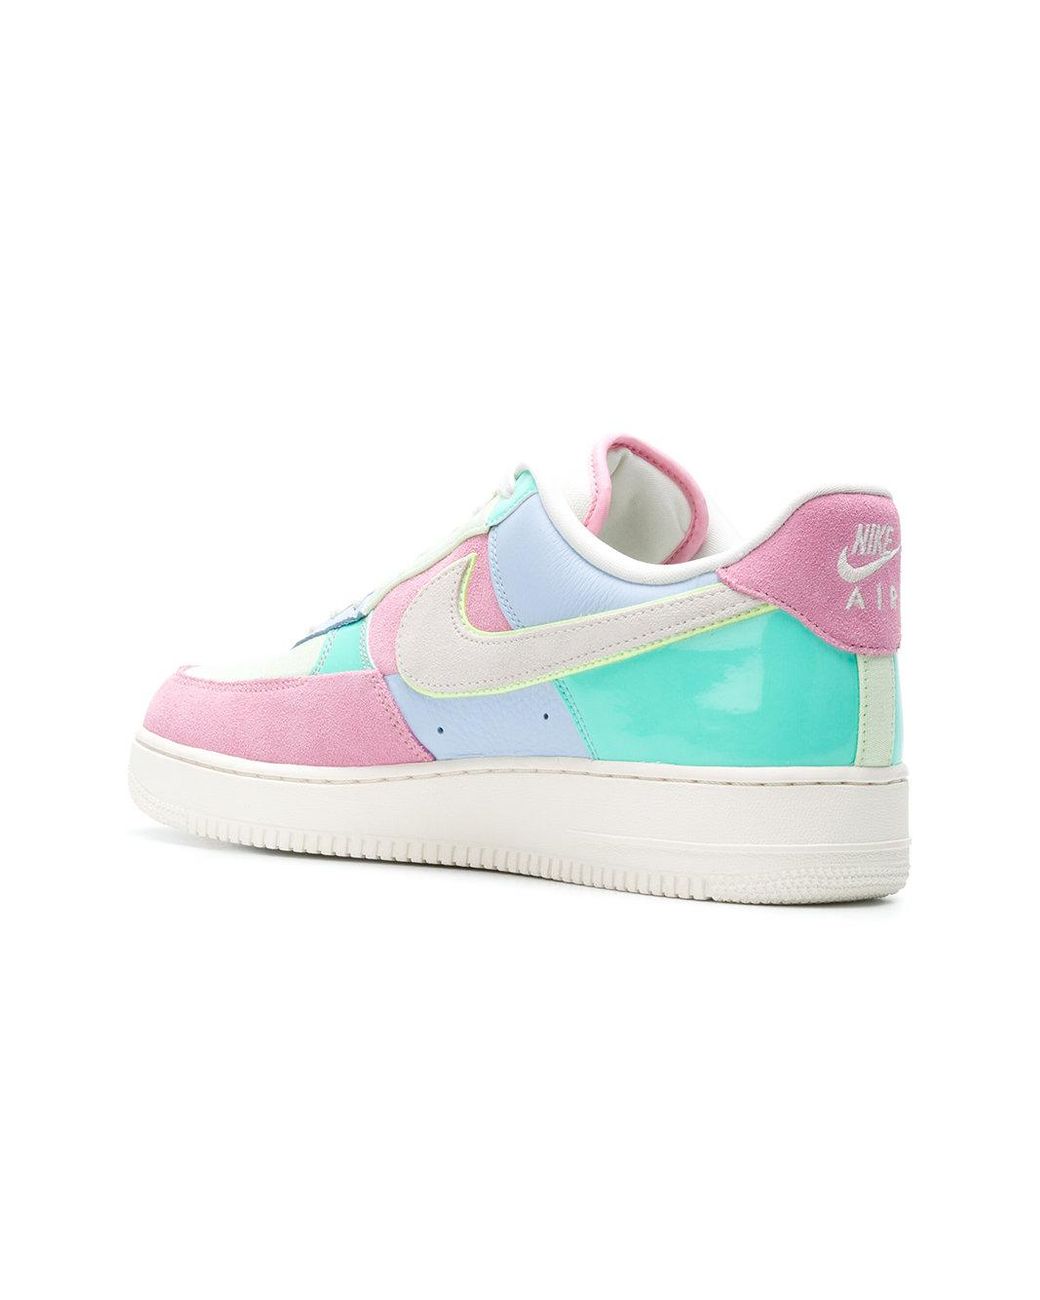 Nike Cotton Air Force 1 Easter Egg Sneakers | Lyst Australia